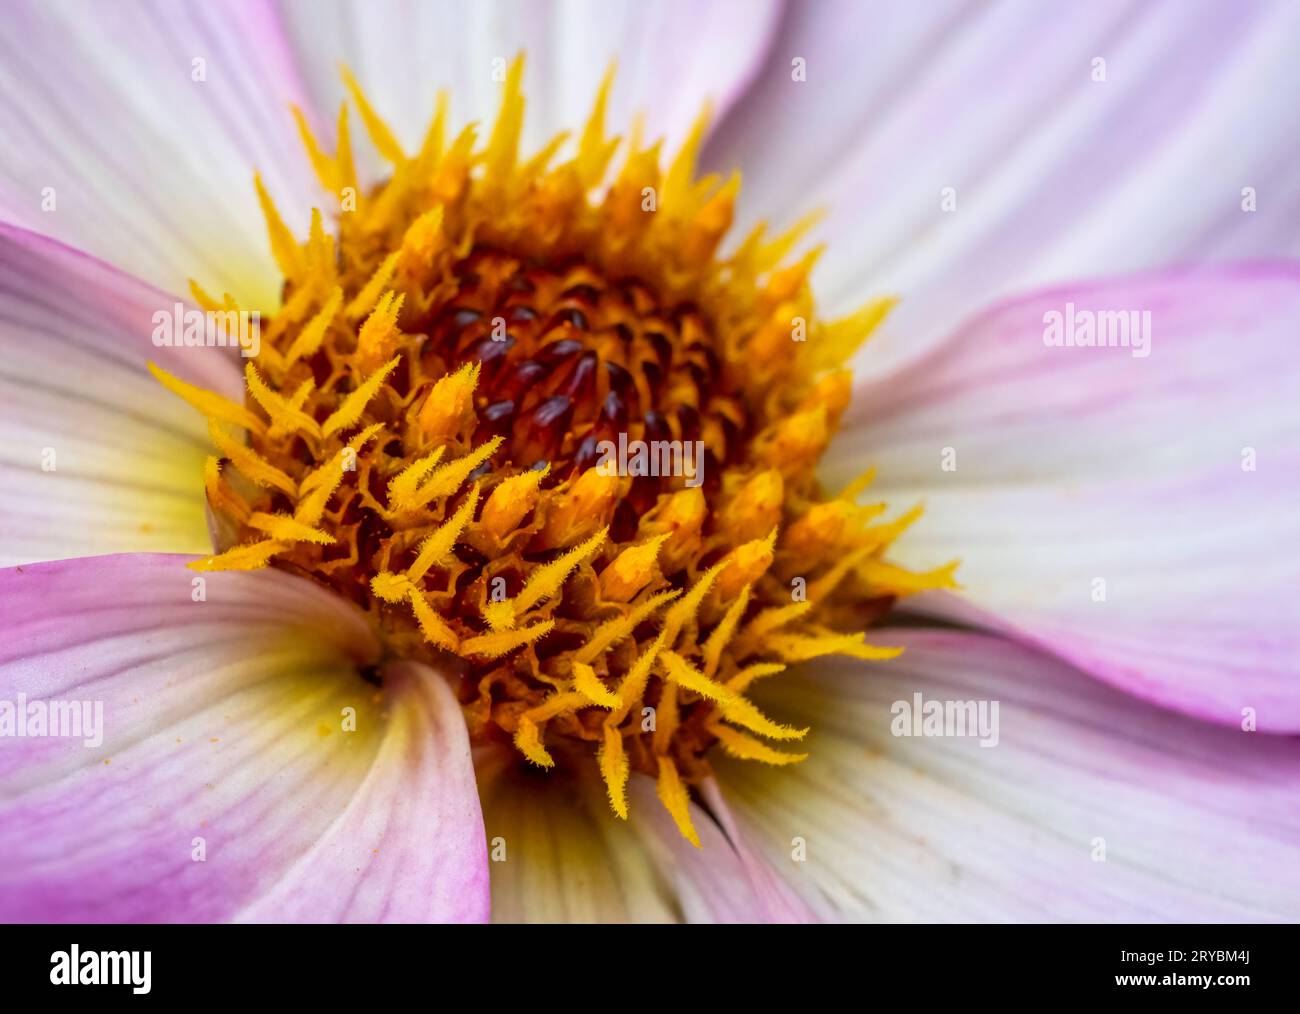 A close-up of a pink and white Dahlia flower Stock Photo